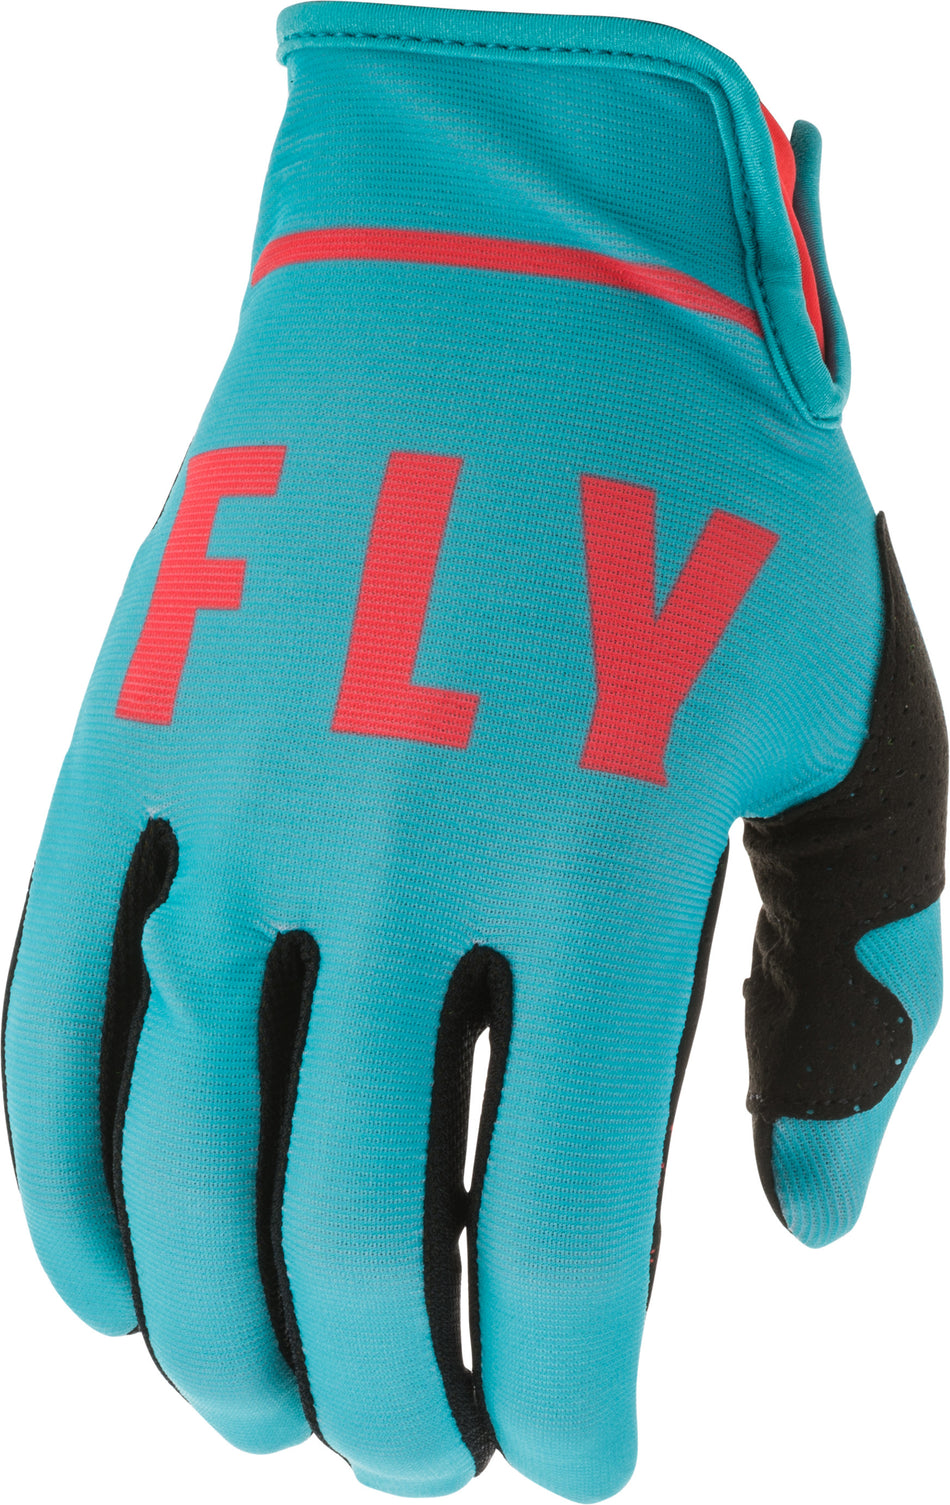 FLY RACING Lite Gloves Blue/Coral Sz 07 373-71907